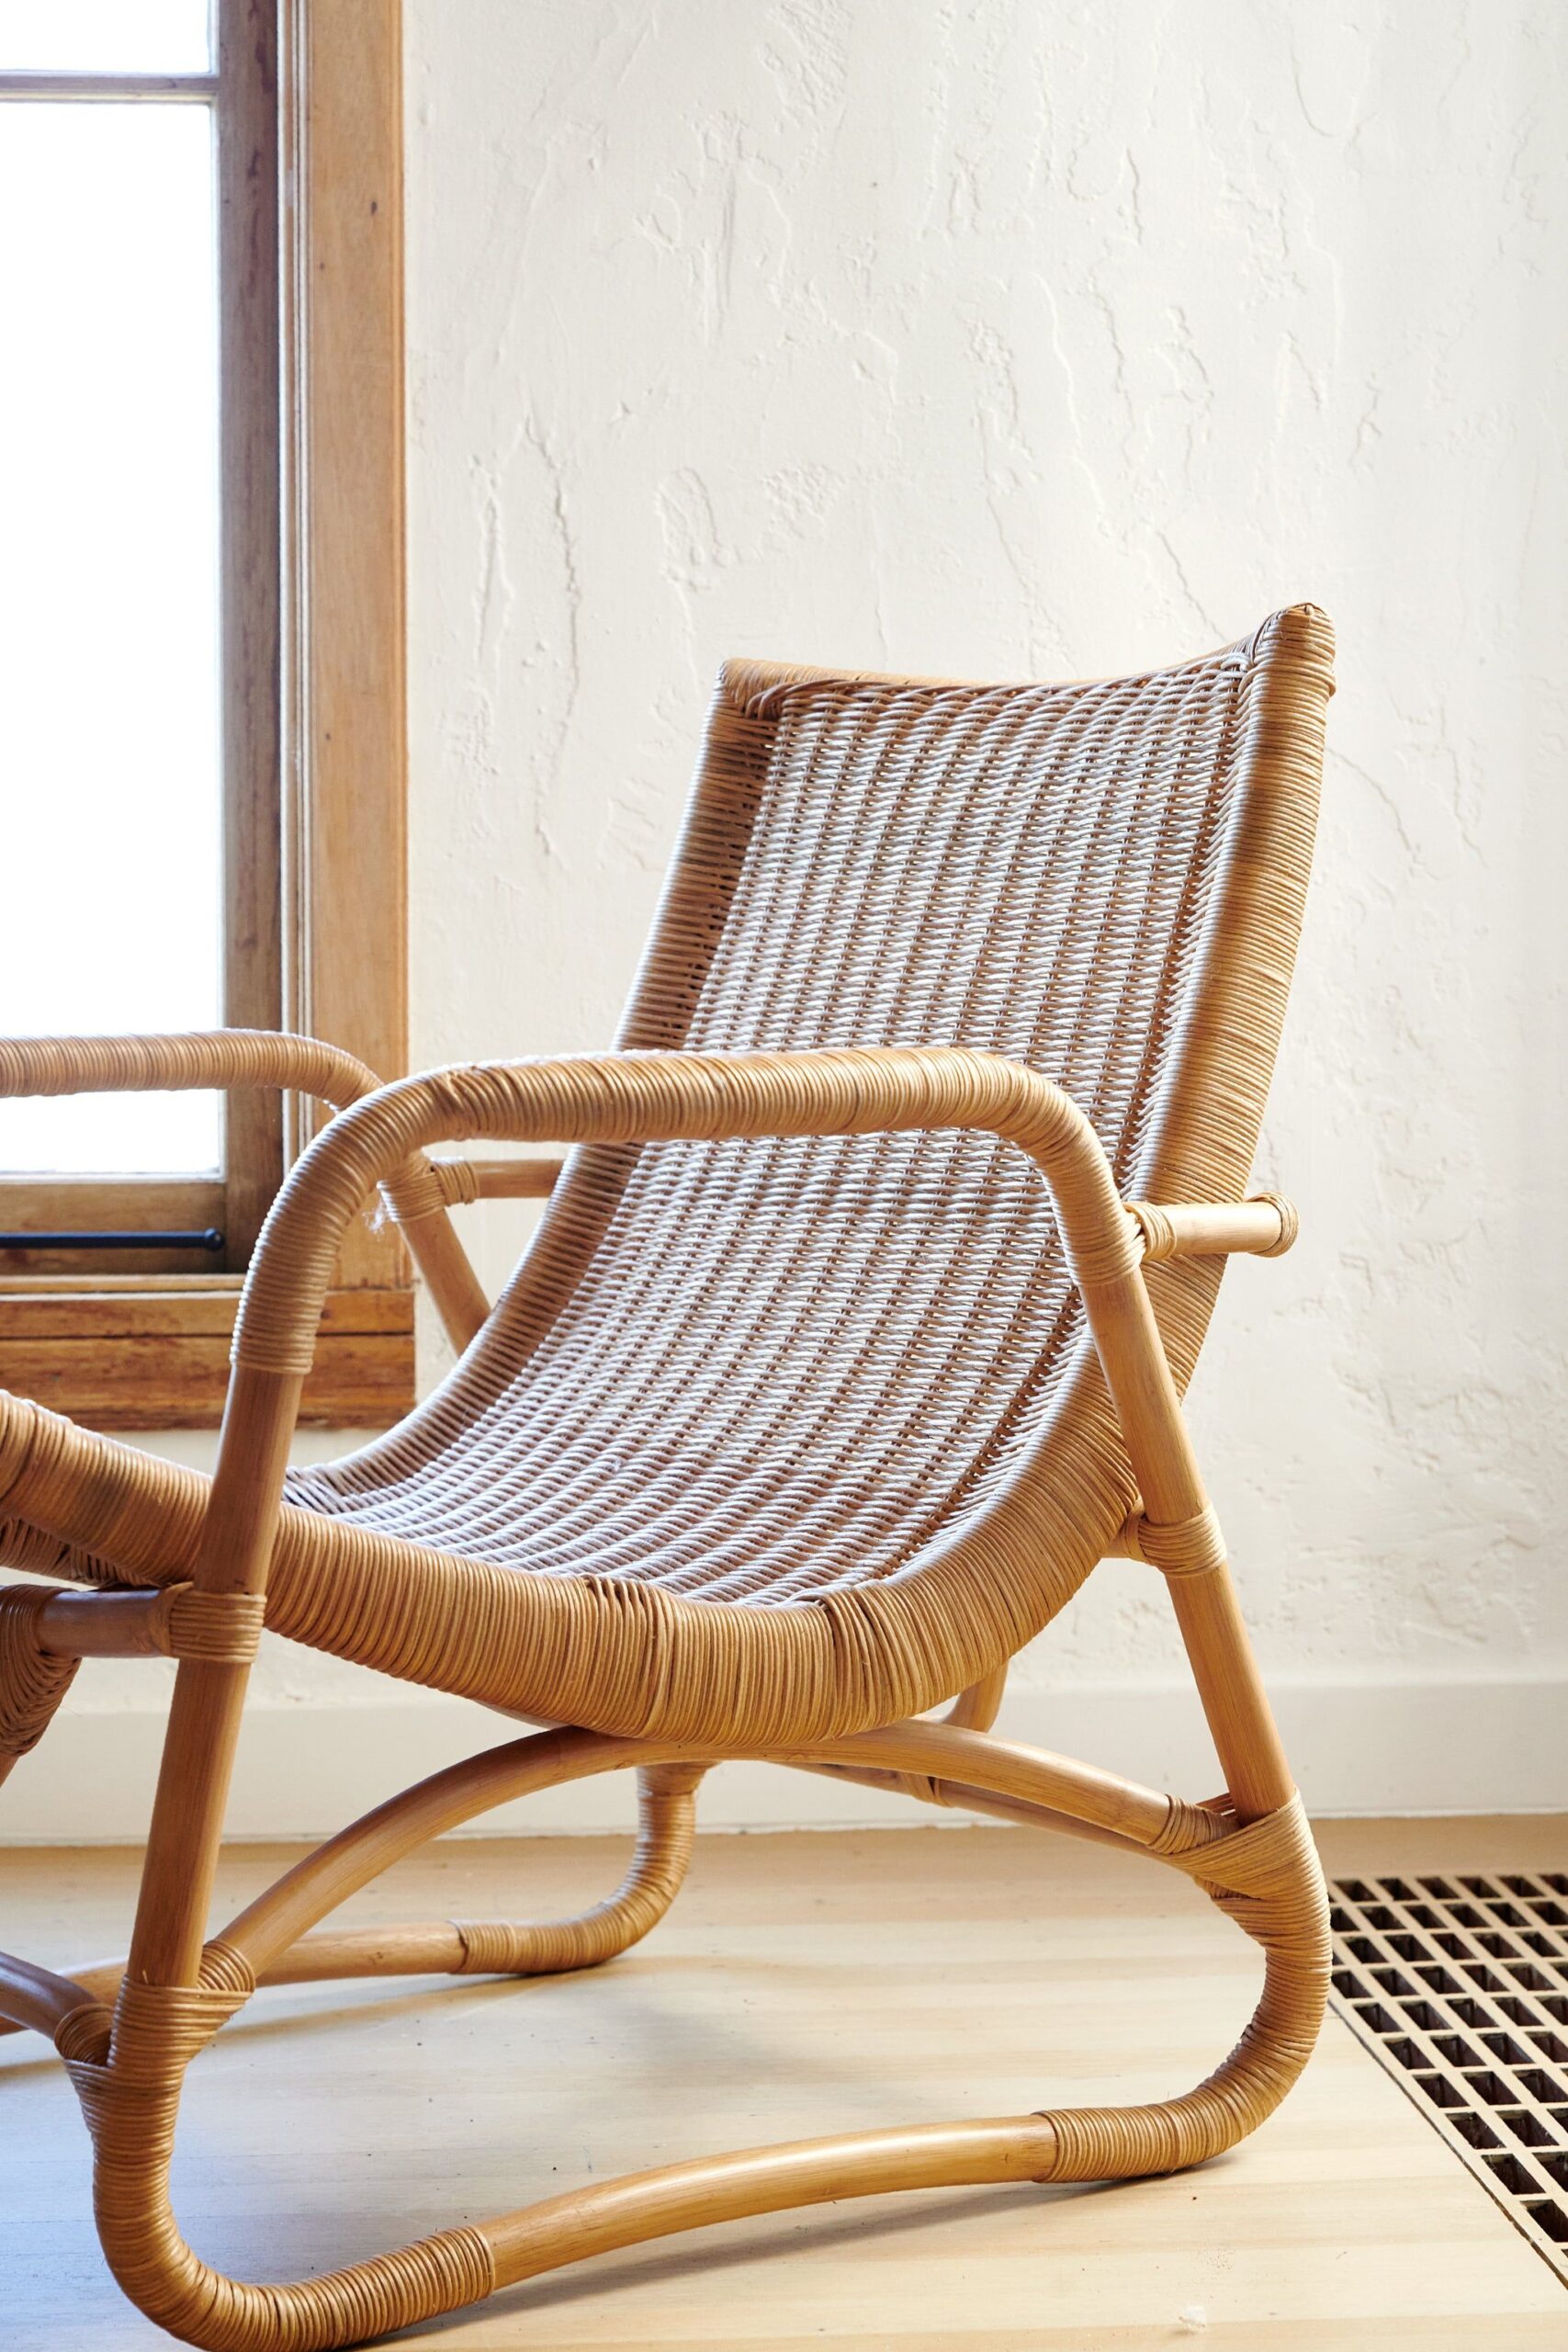 Discover the Timeless Beauty of Rattan Outdoor Furniture